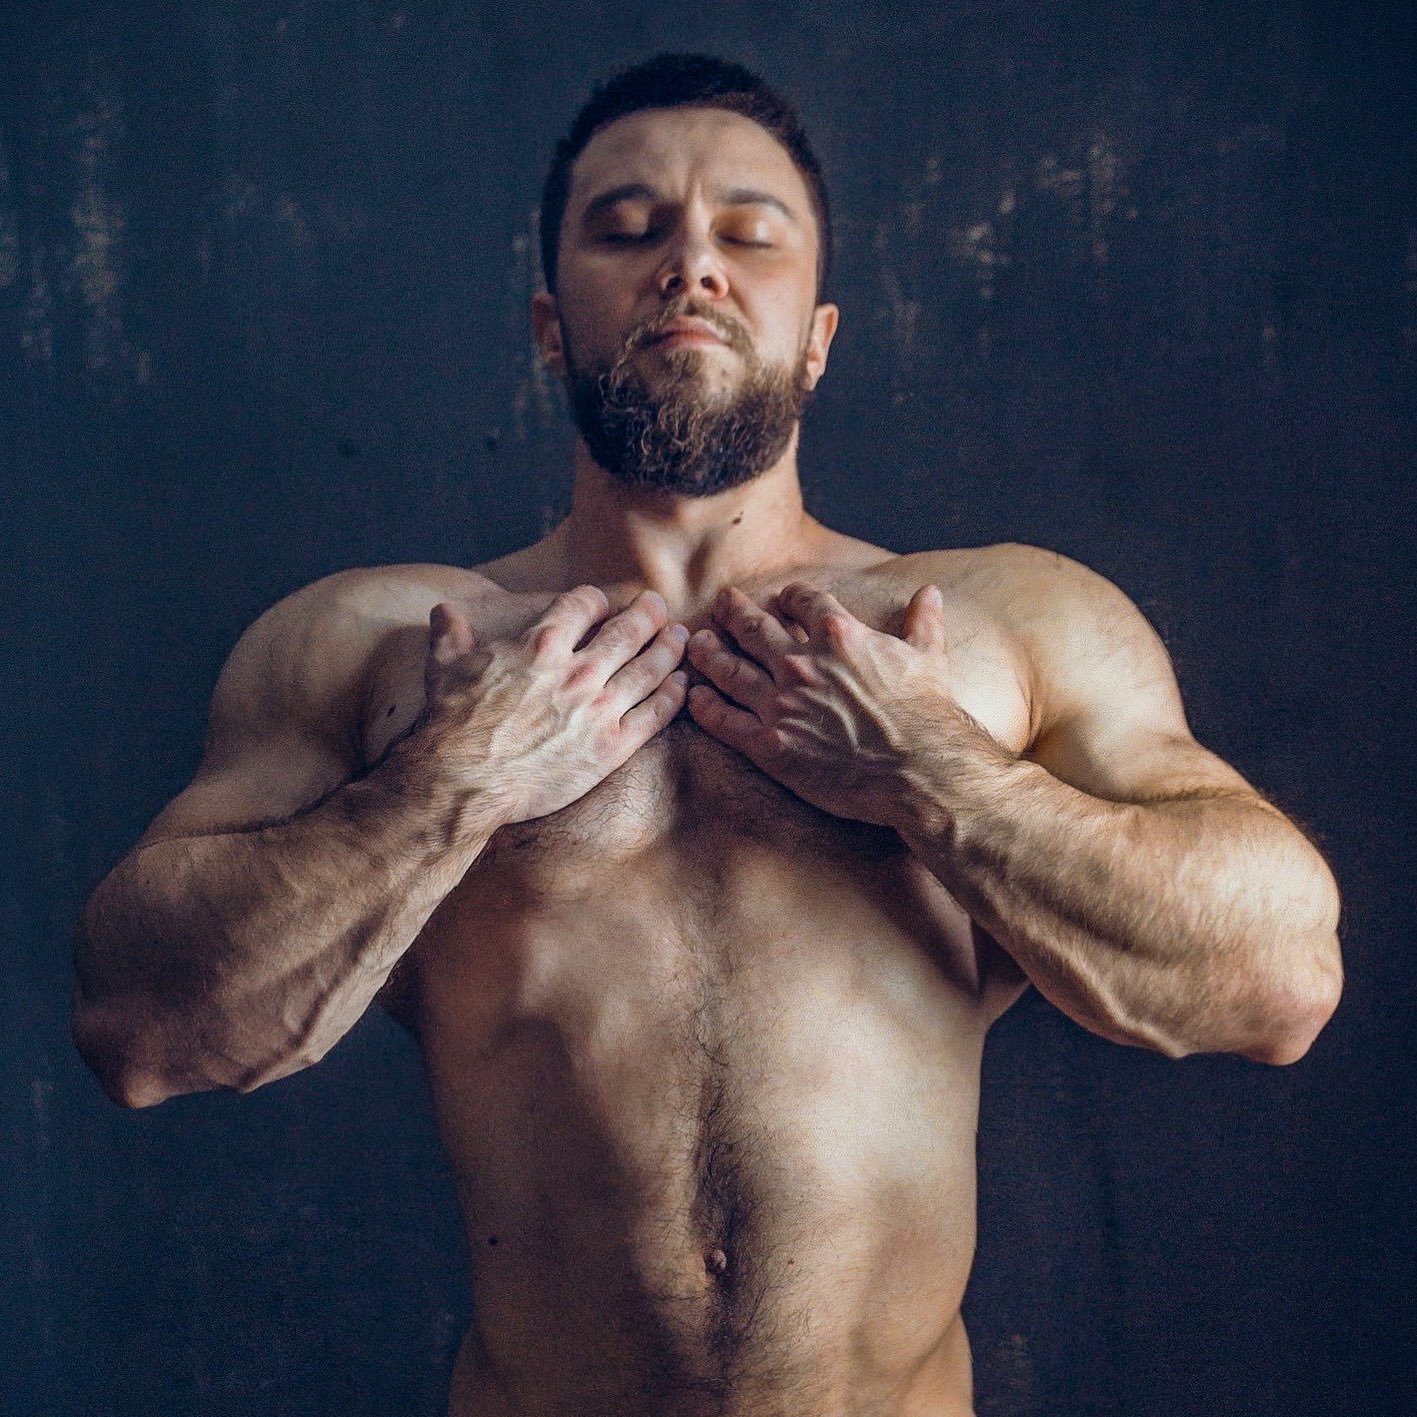 NAVYFUCKER: Muscle beauty from Russia 